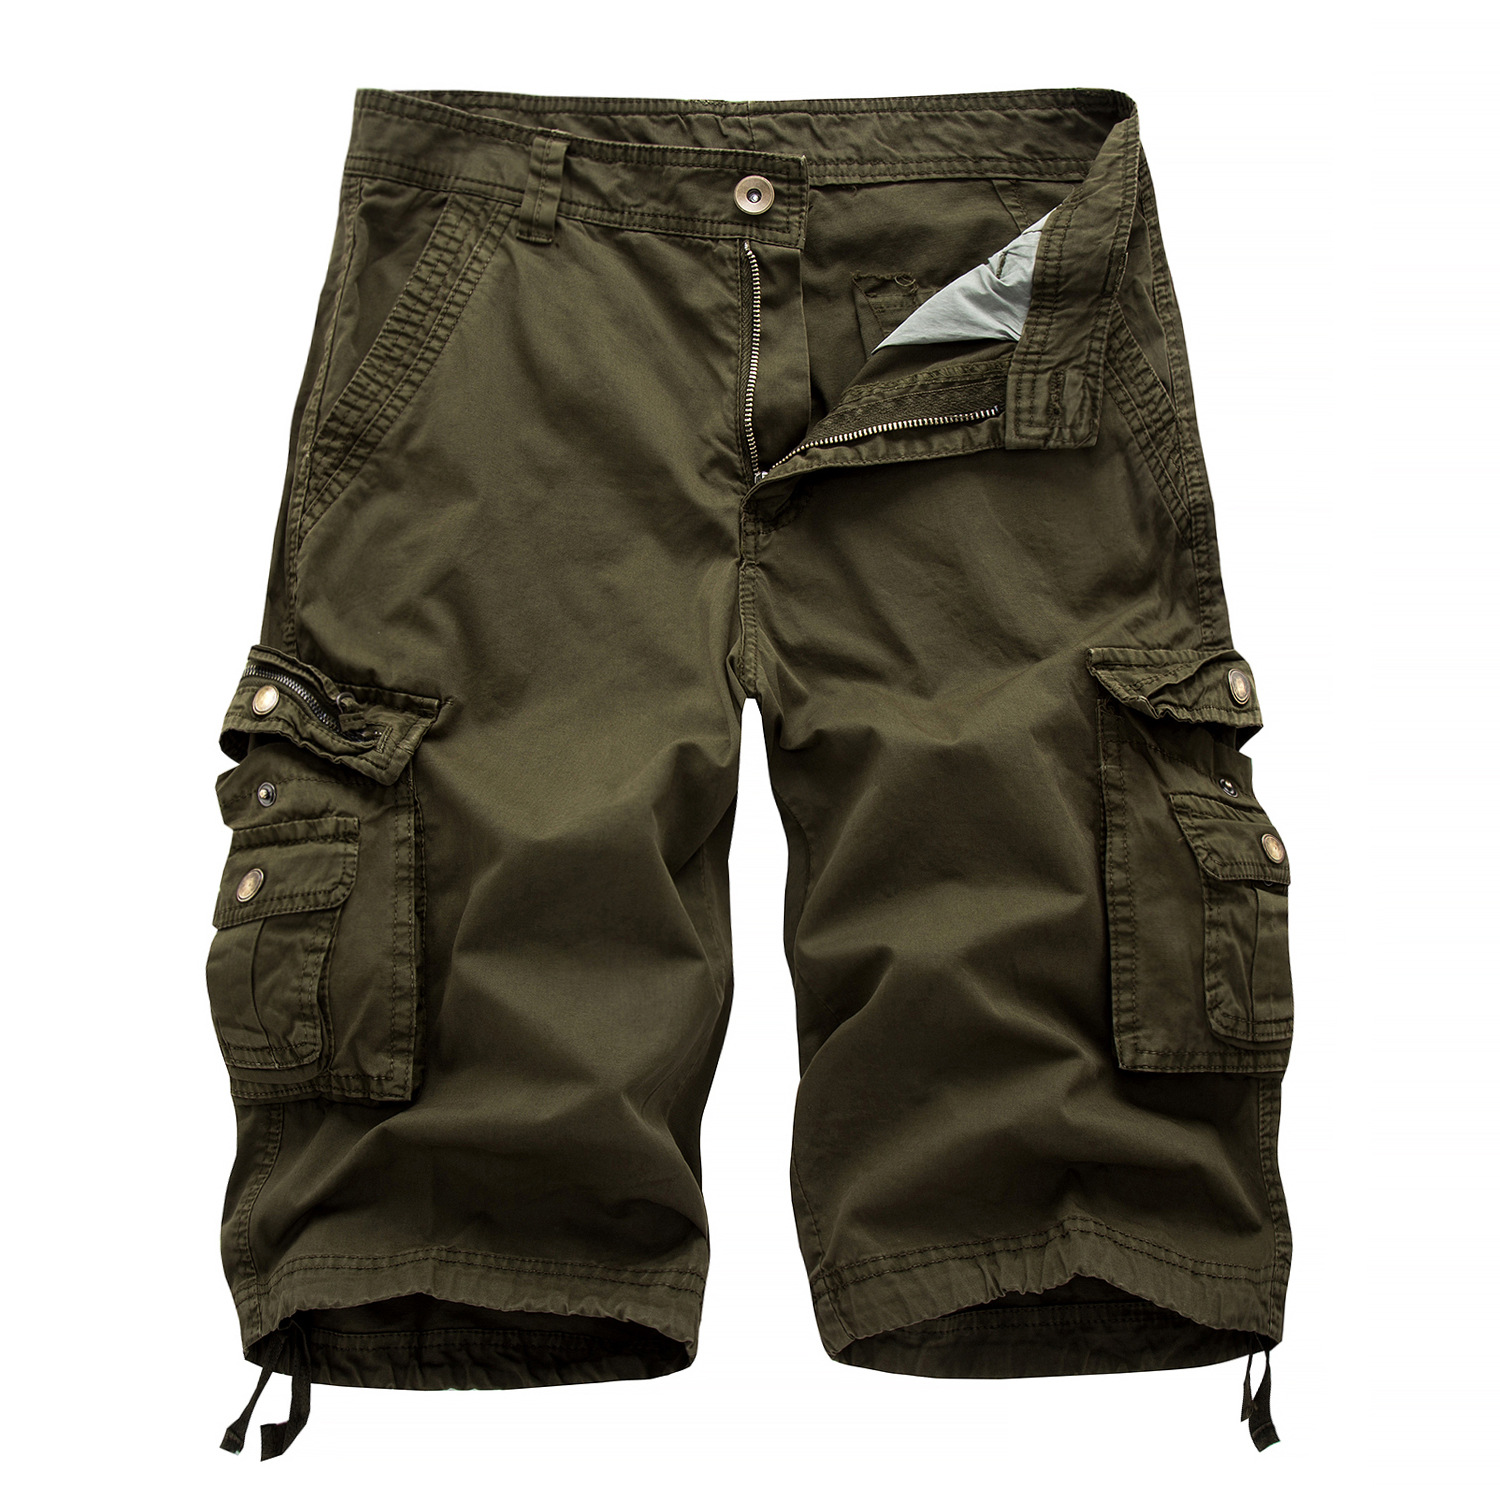 PLus Size 44 Shorts Fashion Mens Cargo Short Pants Summer Army Green Cotton Male Loose Multi-Pocket Homme Casual Bermuda Trousers No Elasticity Bottoms